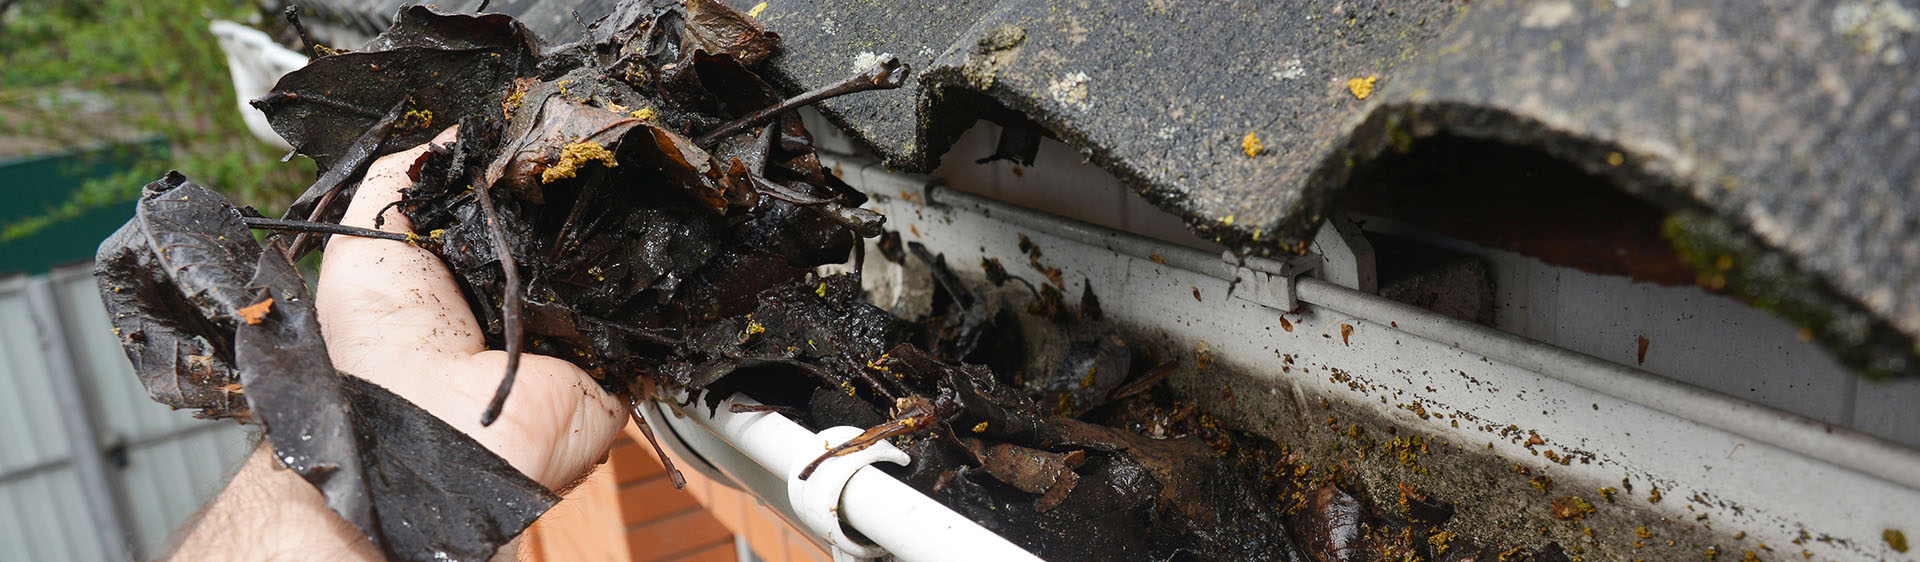 North Augusta, SC Gutter Cleaning, Gutter Installation and Siding Services